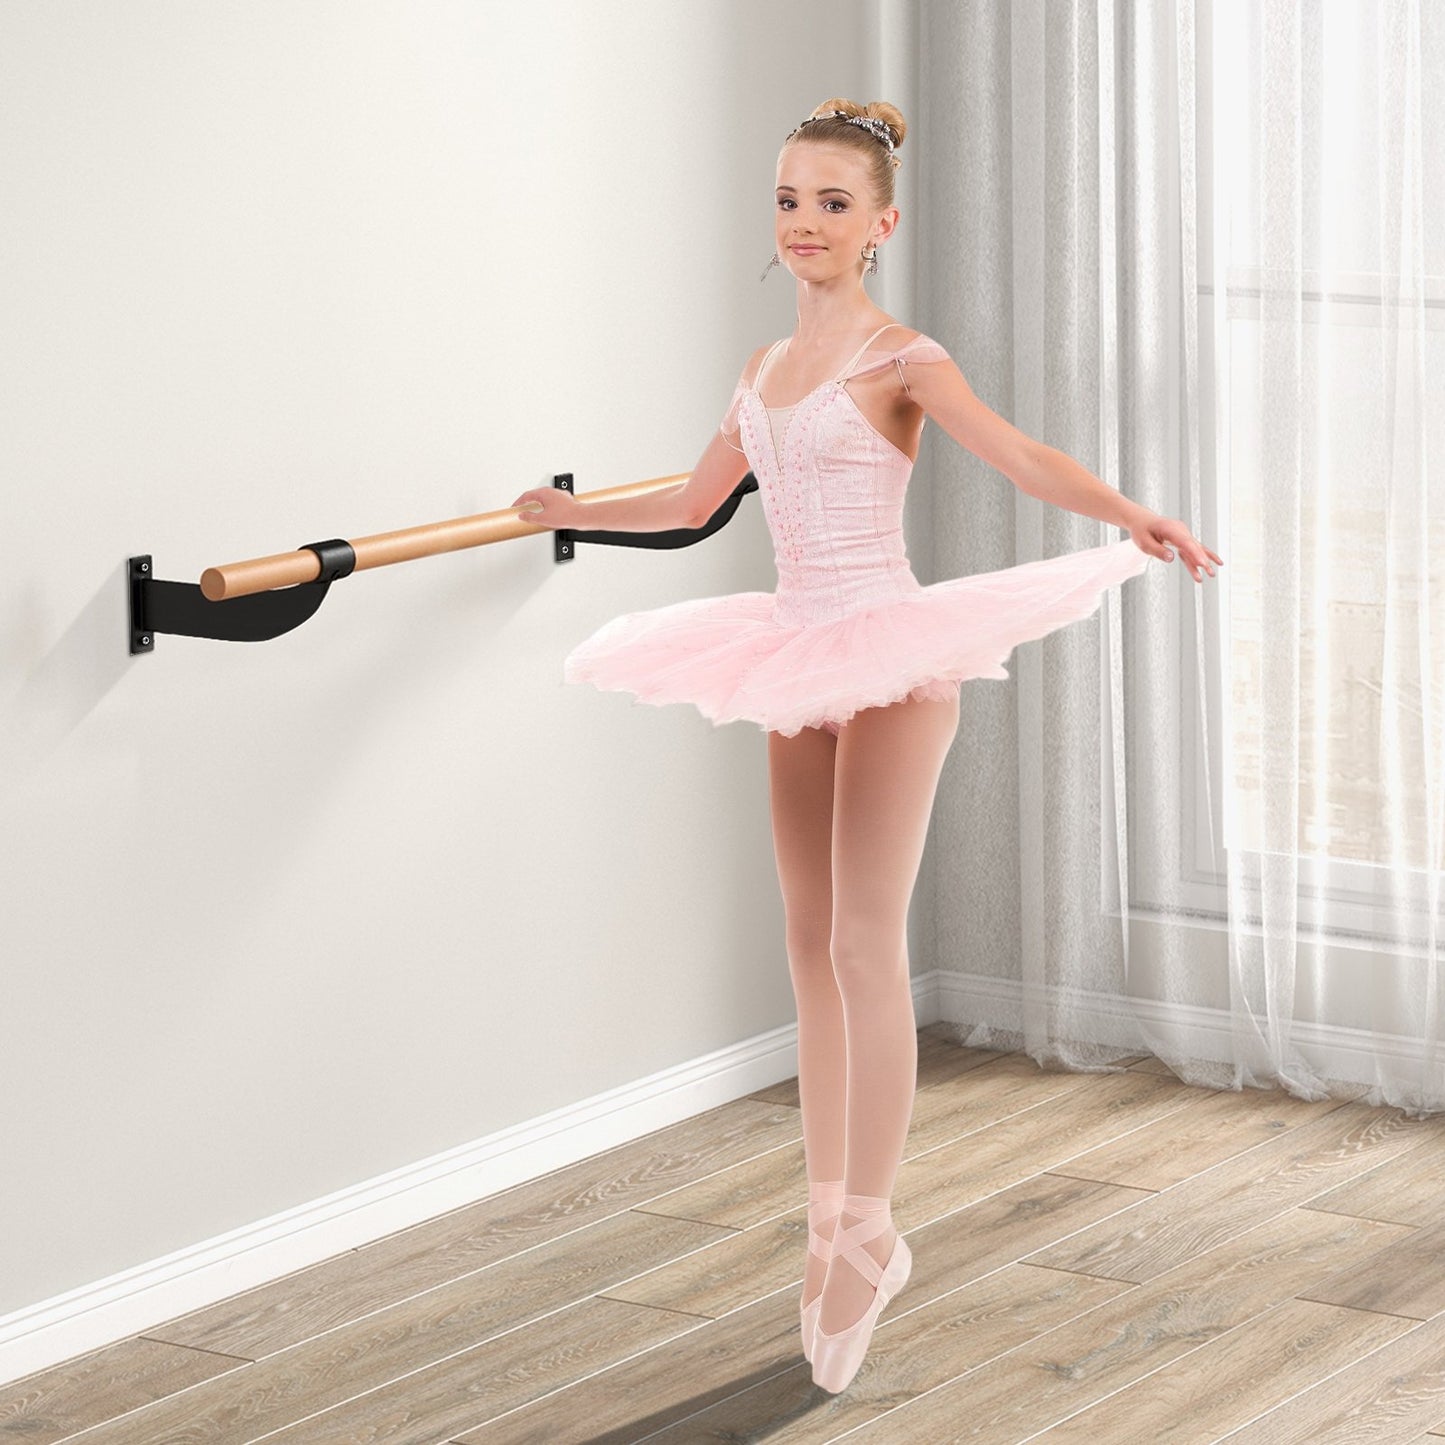 4 Feet Wall-Mounted Ballet Barre for Yoga, Black